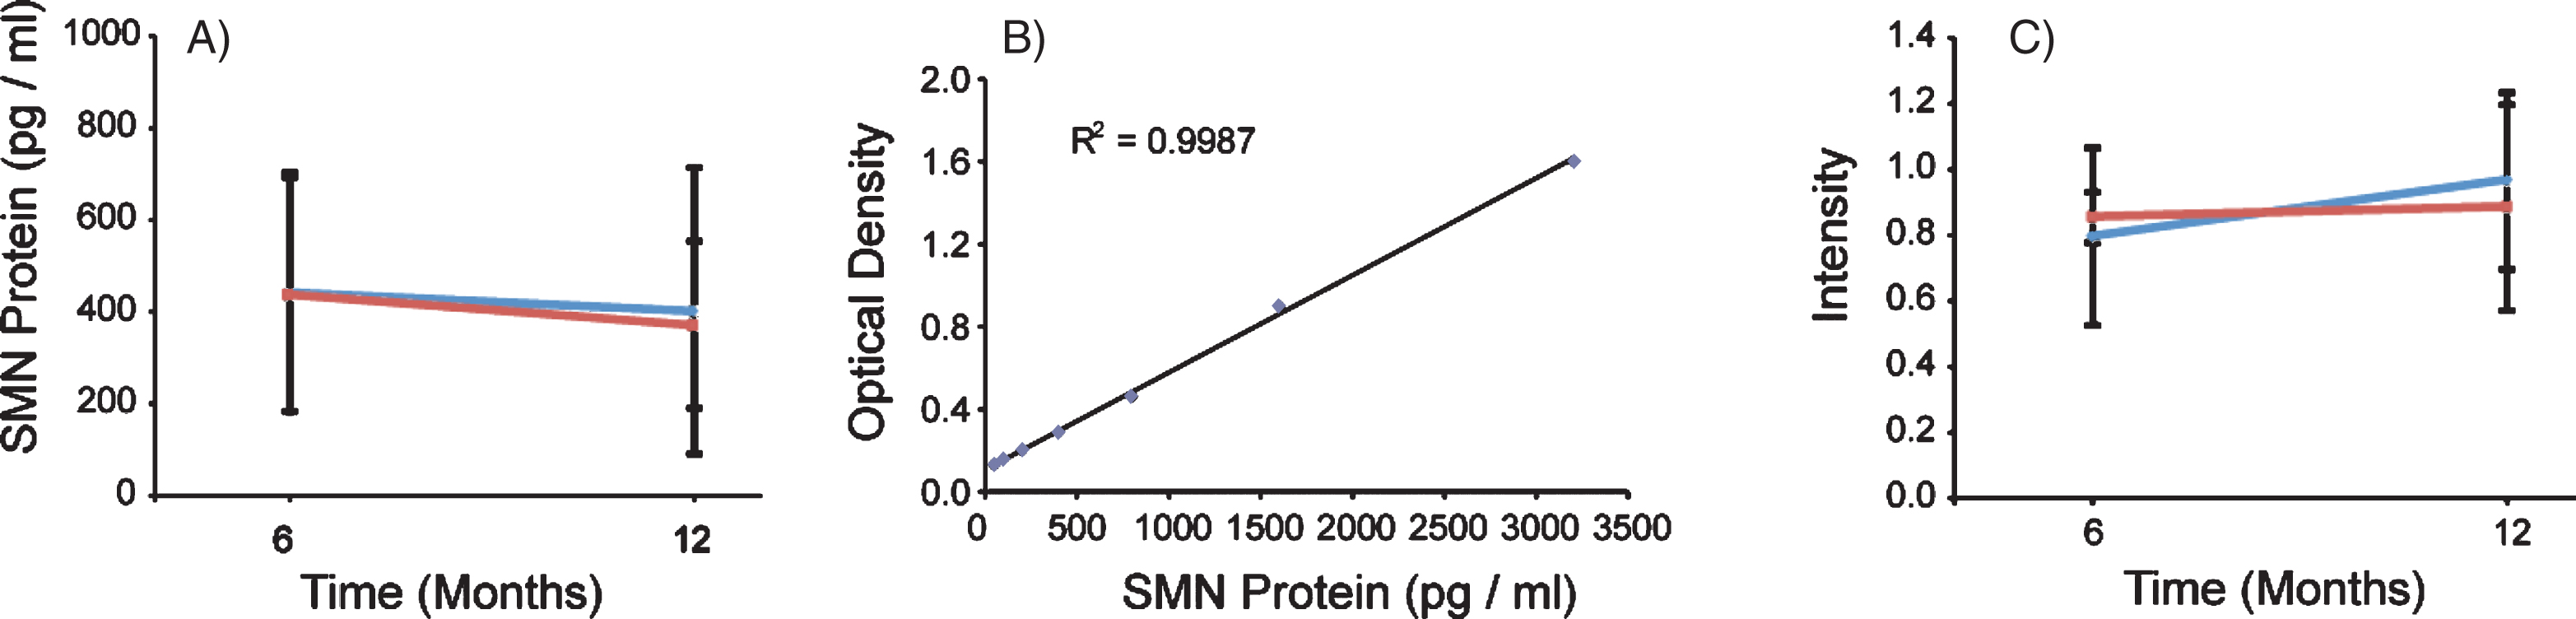 SMN protein concentrations in PBMCs were not altered in the presence of VPA or Placebo. SMN protein was measured using the SMN ELISA and absorbance values were extrapolated from the provided standard curve. A) Both Group 1 and Group 2 mean SMN protein levels were calculated by visit, and 13 and 18 subjects respectively. Group 1 (VPA/Placebo) had mean SMN protein concentrations of 442.8 (±260.7) pg per ml of total protein to 402.39 (±311.5) pg/ml of total protein. Group 2 (Placebo/VPA) had similar concentrations of SMN protein, 438.1 (±254.3) to 372.2 (±182.1) pg/ml of total protein, p >  0.05. B) Representative standard curve from one of the four plates ran for this experiment. Purified SMN protein was loaded on the plate by a serial dilution from 50 pg/ml to 3200 pg/ml, these concentrations correspond to optical densities yielding a linear regression with an r2 value of 0.9987. C) SMN Cell Immunoassay. SMN protein concentrations were standardized by taking a ratio of SMN protein to that of an endogenous protein control, Y12. Group 1 (VPA/Placebo) had an N of 9 and the mean ratios of SMN/Y12 were 0.796 (±0.077) to 0.965 (±0.313) Group 2 (Placebo/VPA) had a 0.965 (±0.313). Group 2 (Placebo/VPA) had an N of 12 and the mean ratios of SMN/Y12 were 0.854 (±0.269) to 0.884 (±0.268), p >  0.05.